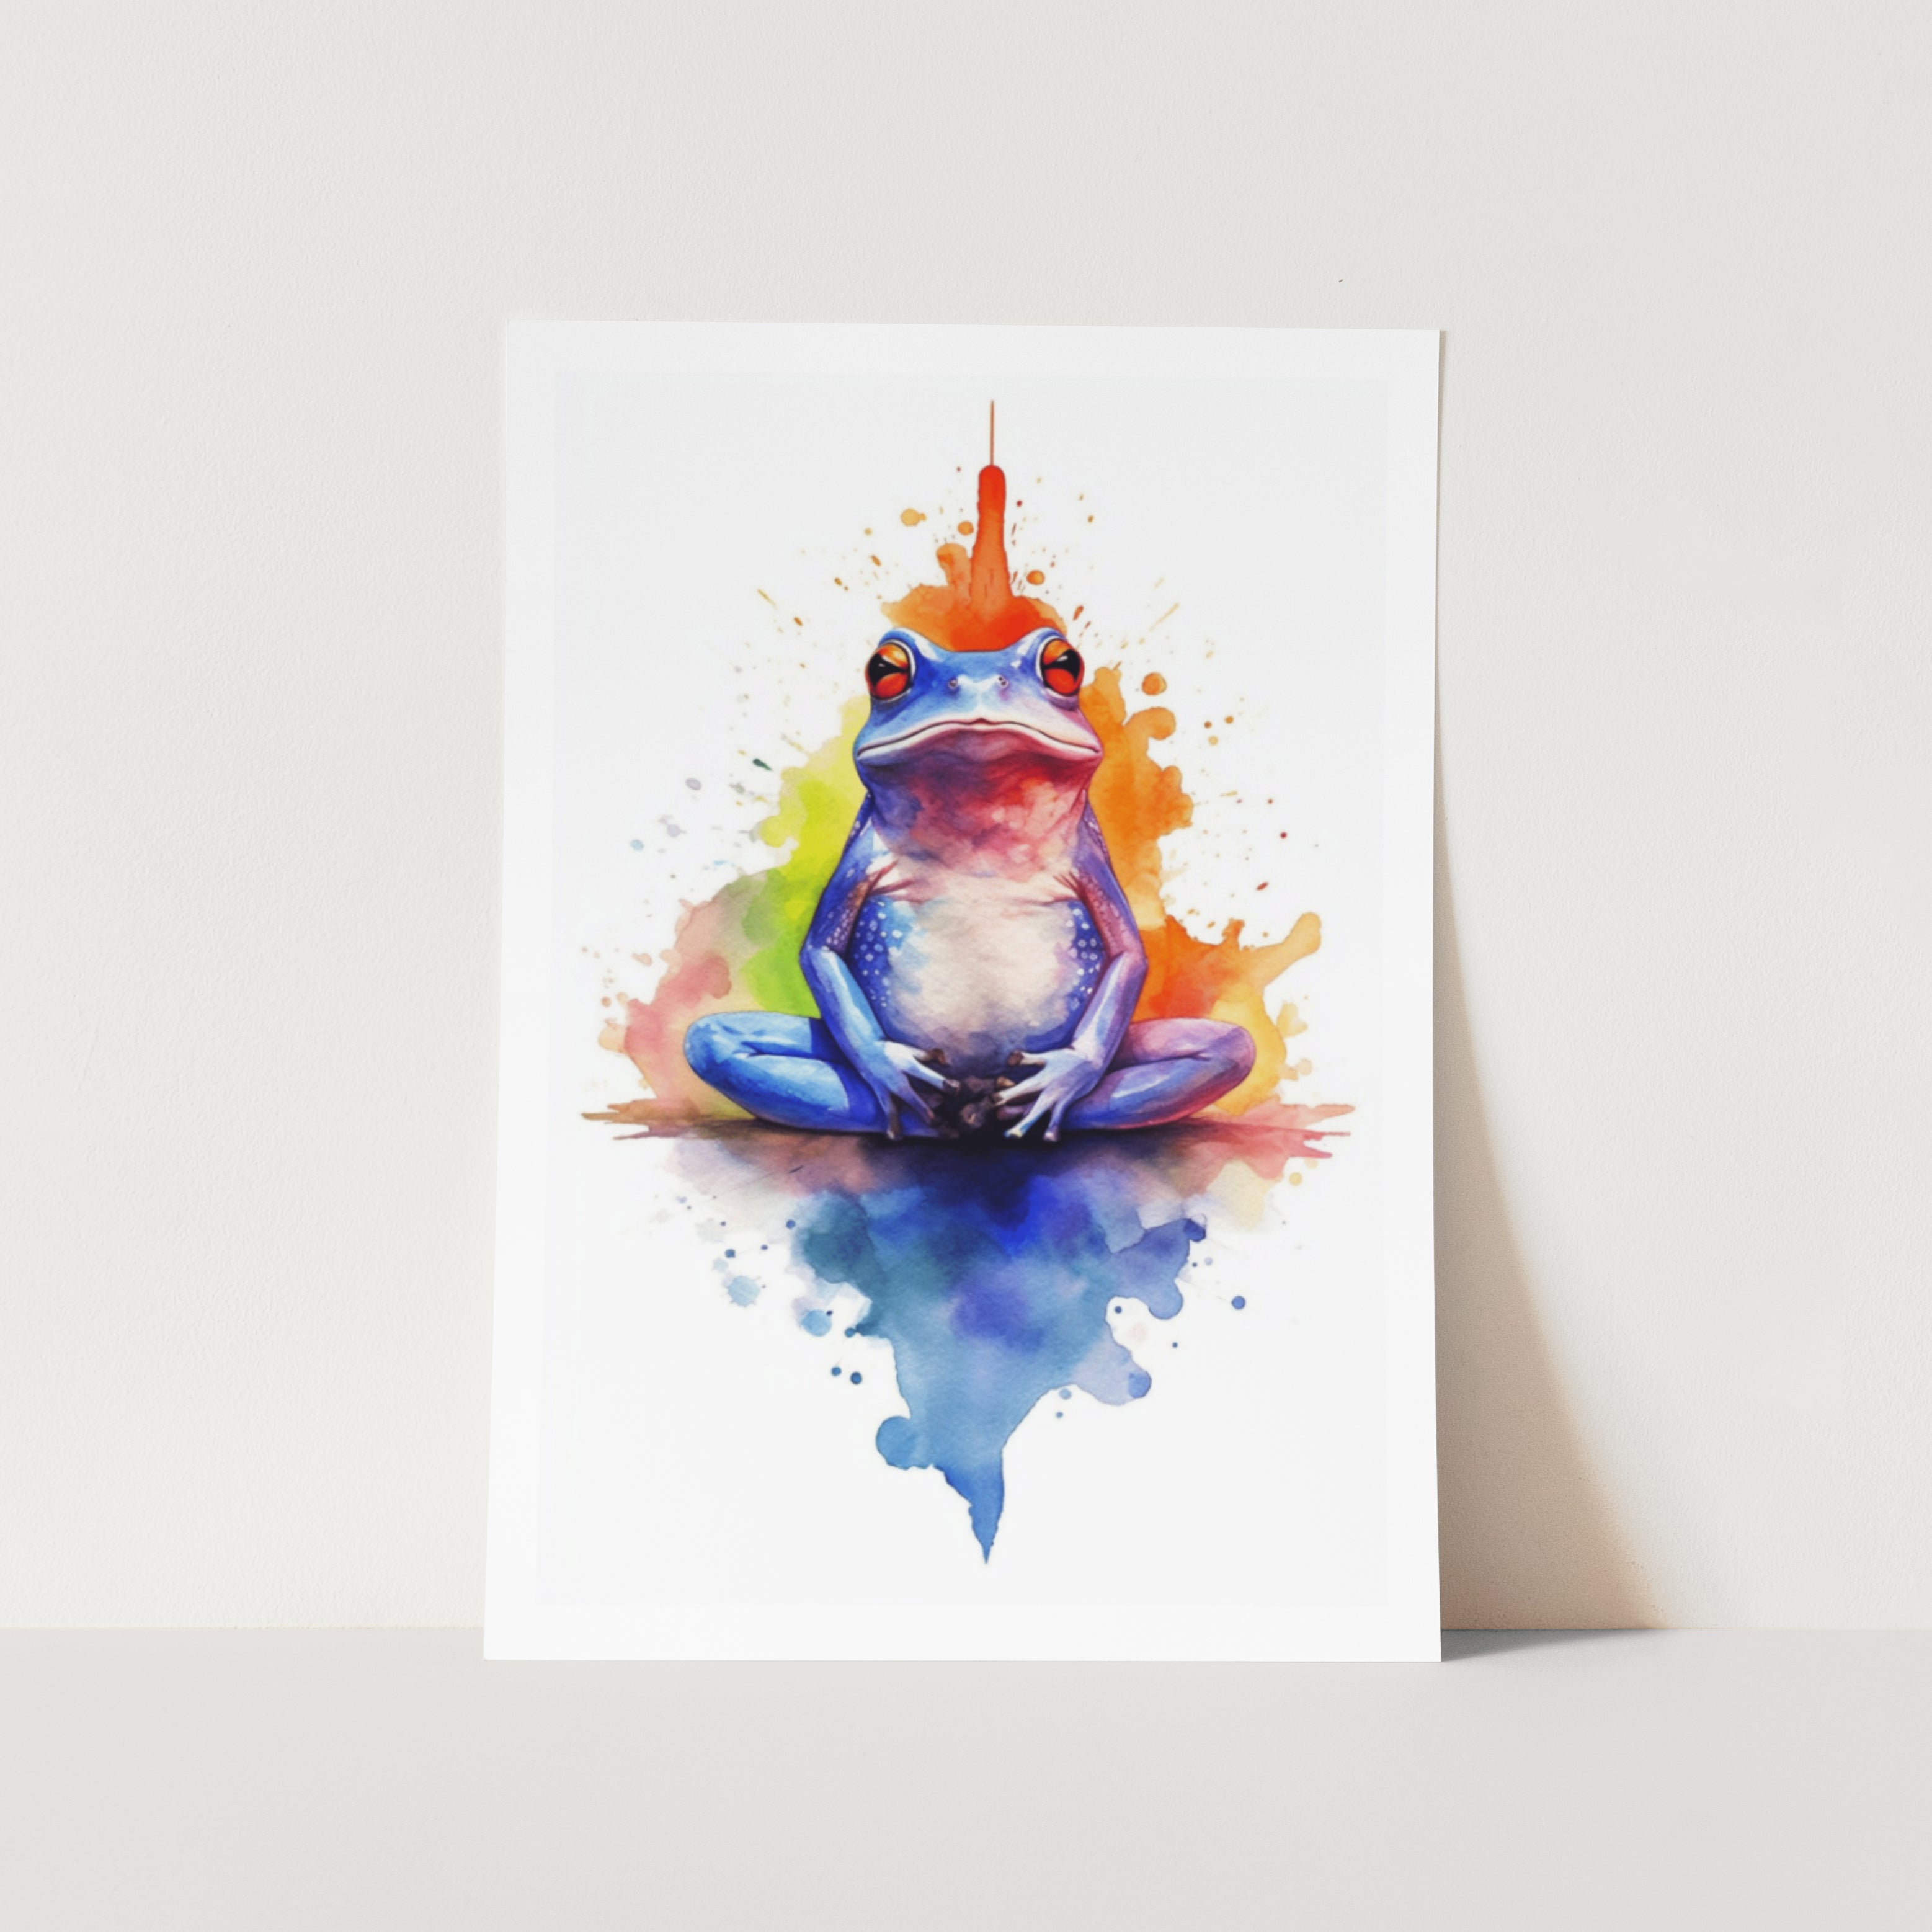 210 Blue frog stuff ideas  frog, photographing artwork, wholesale